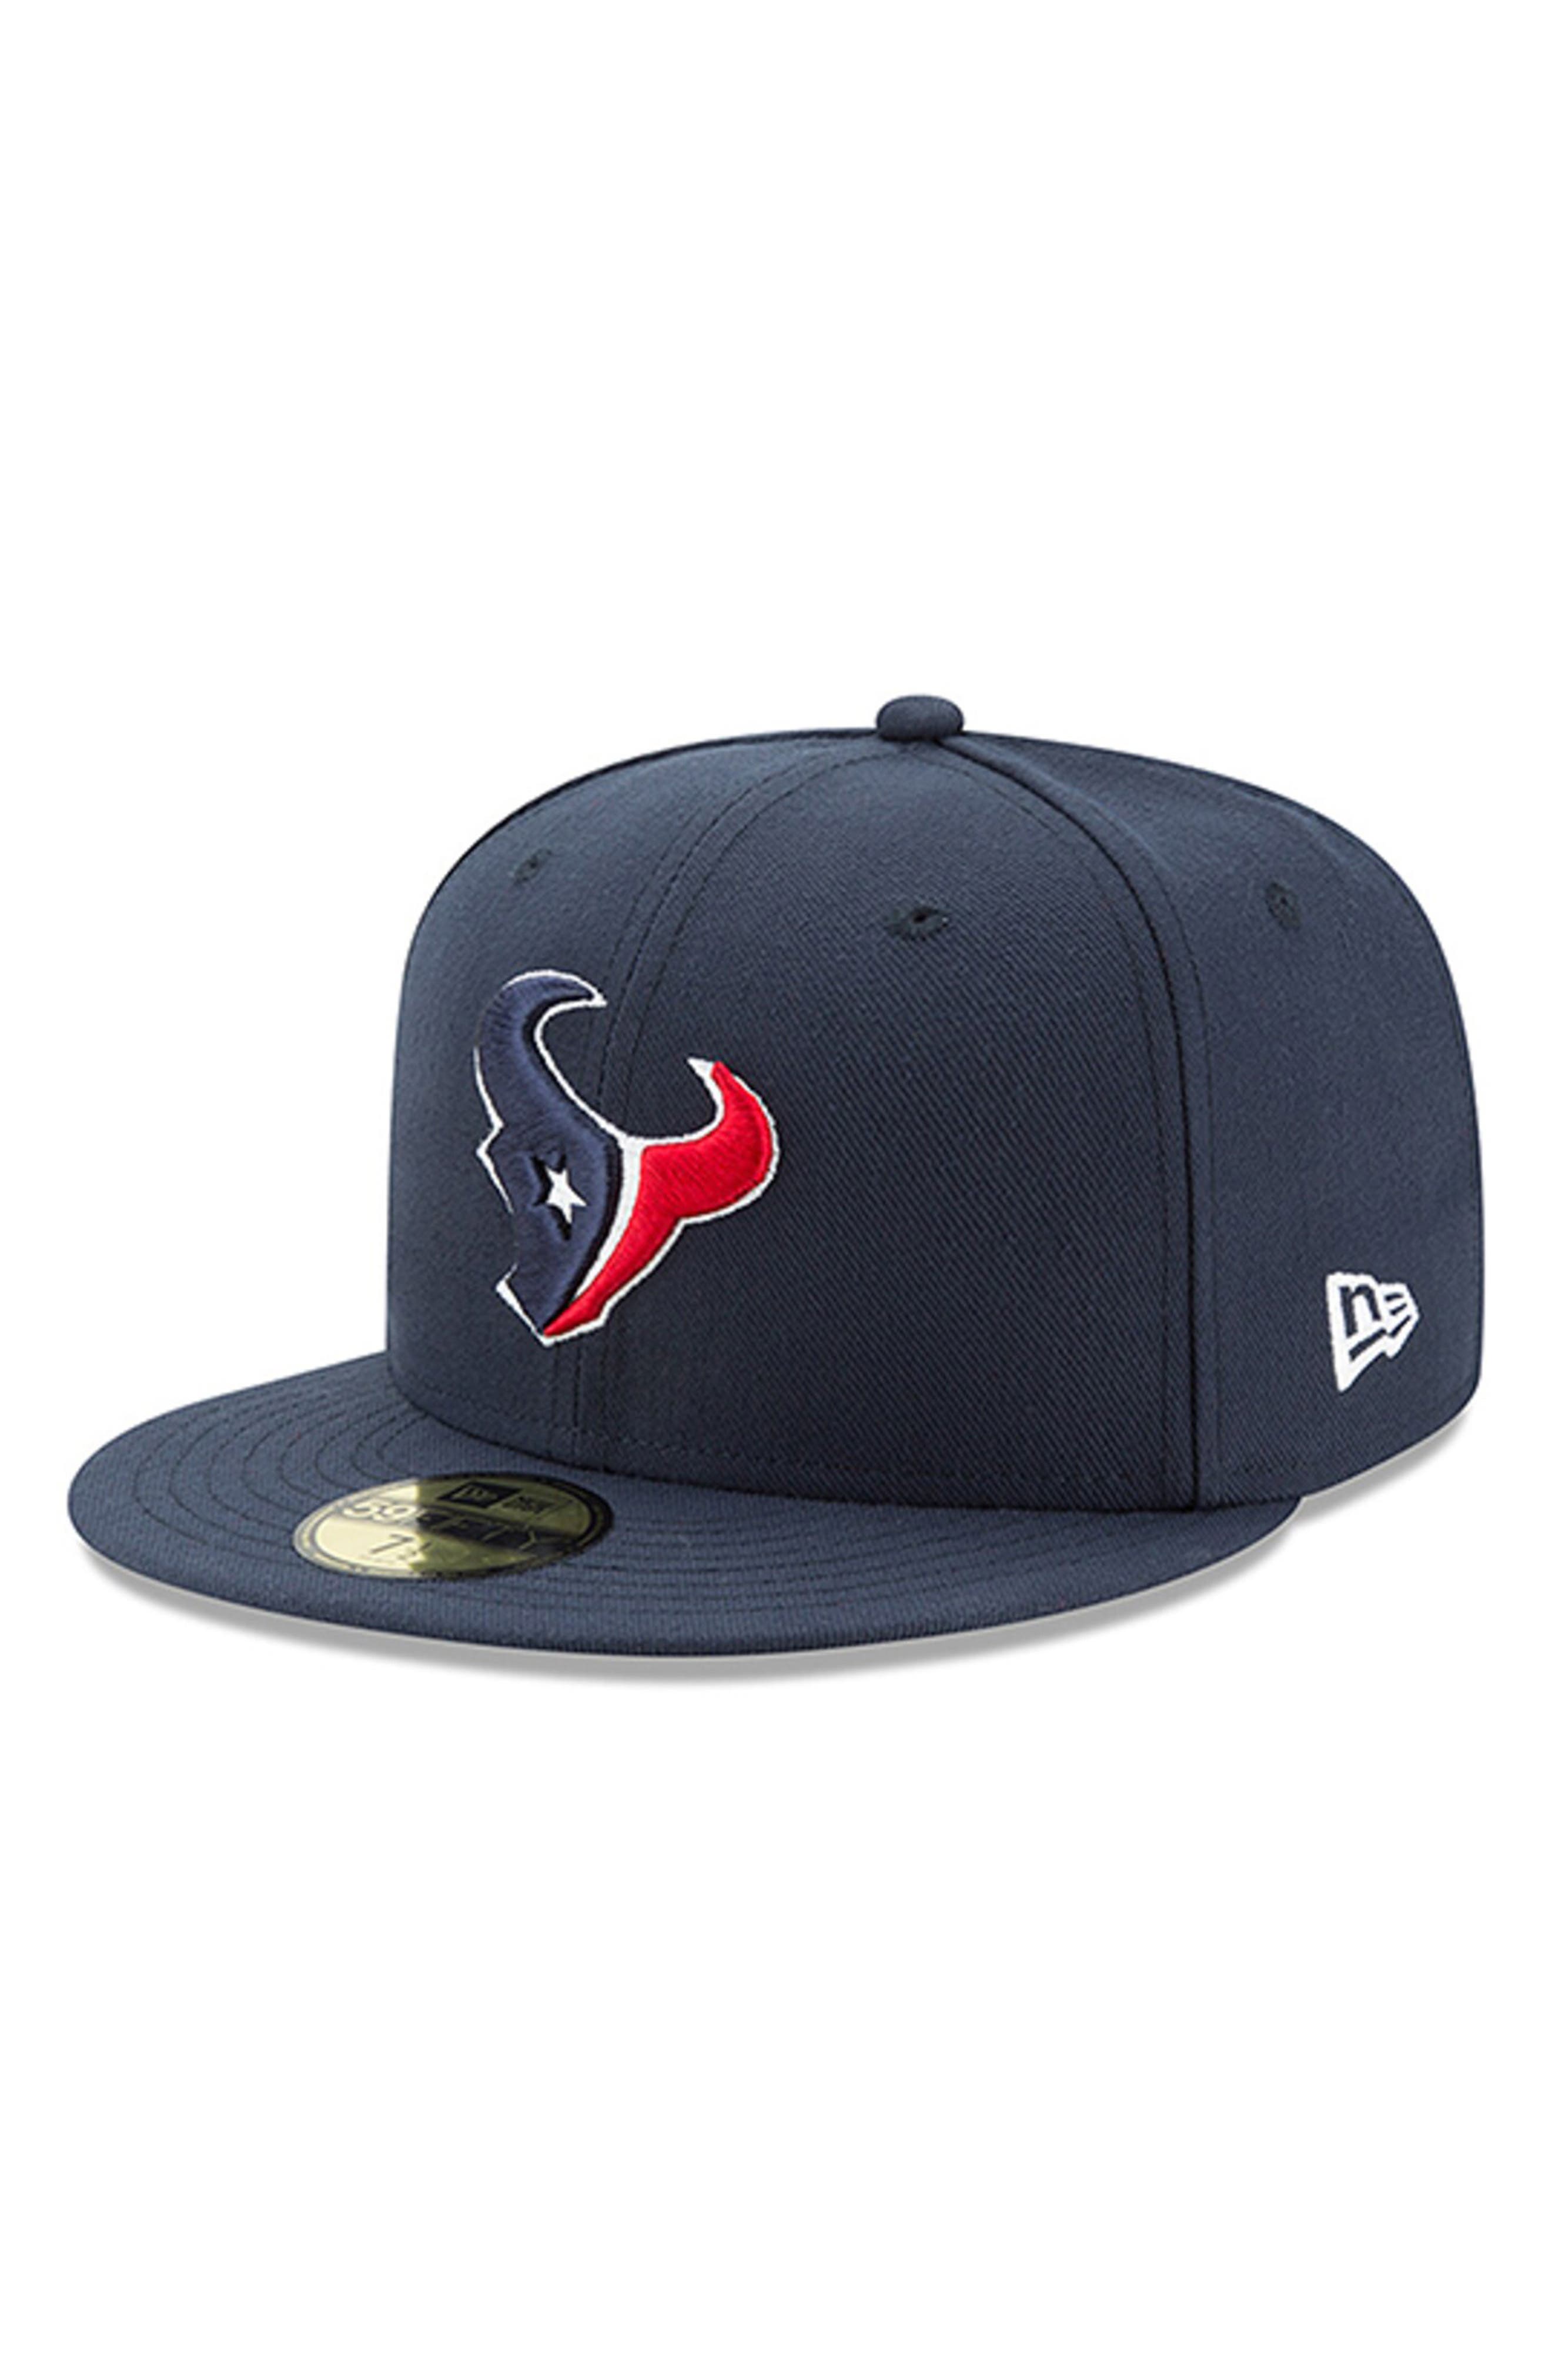 HOMETOWN Houston Texans Details about   New Era 59Fifty Fitted Cap 